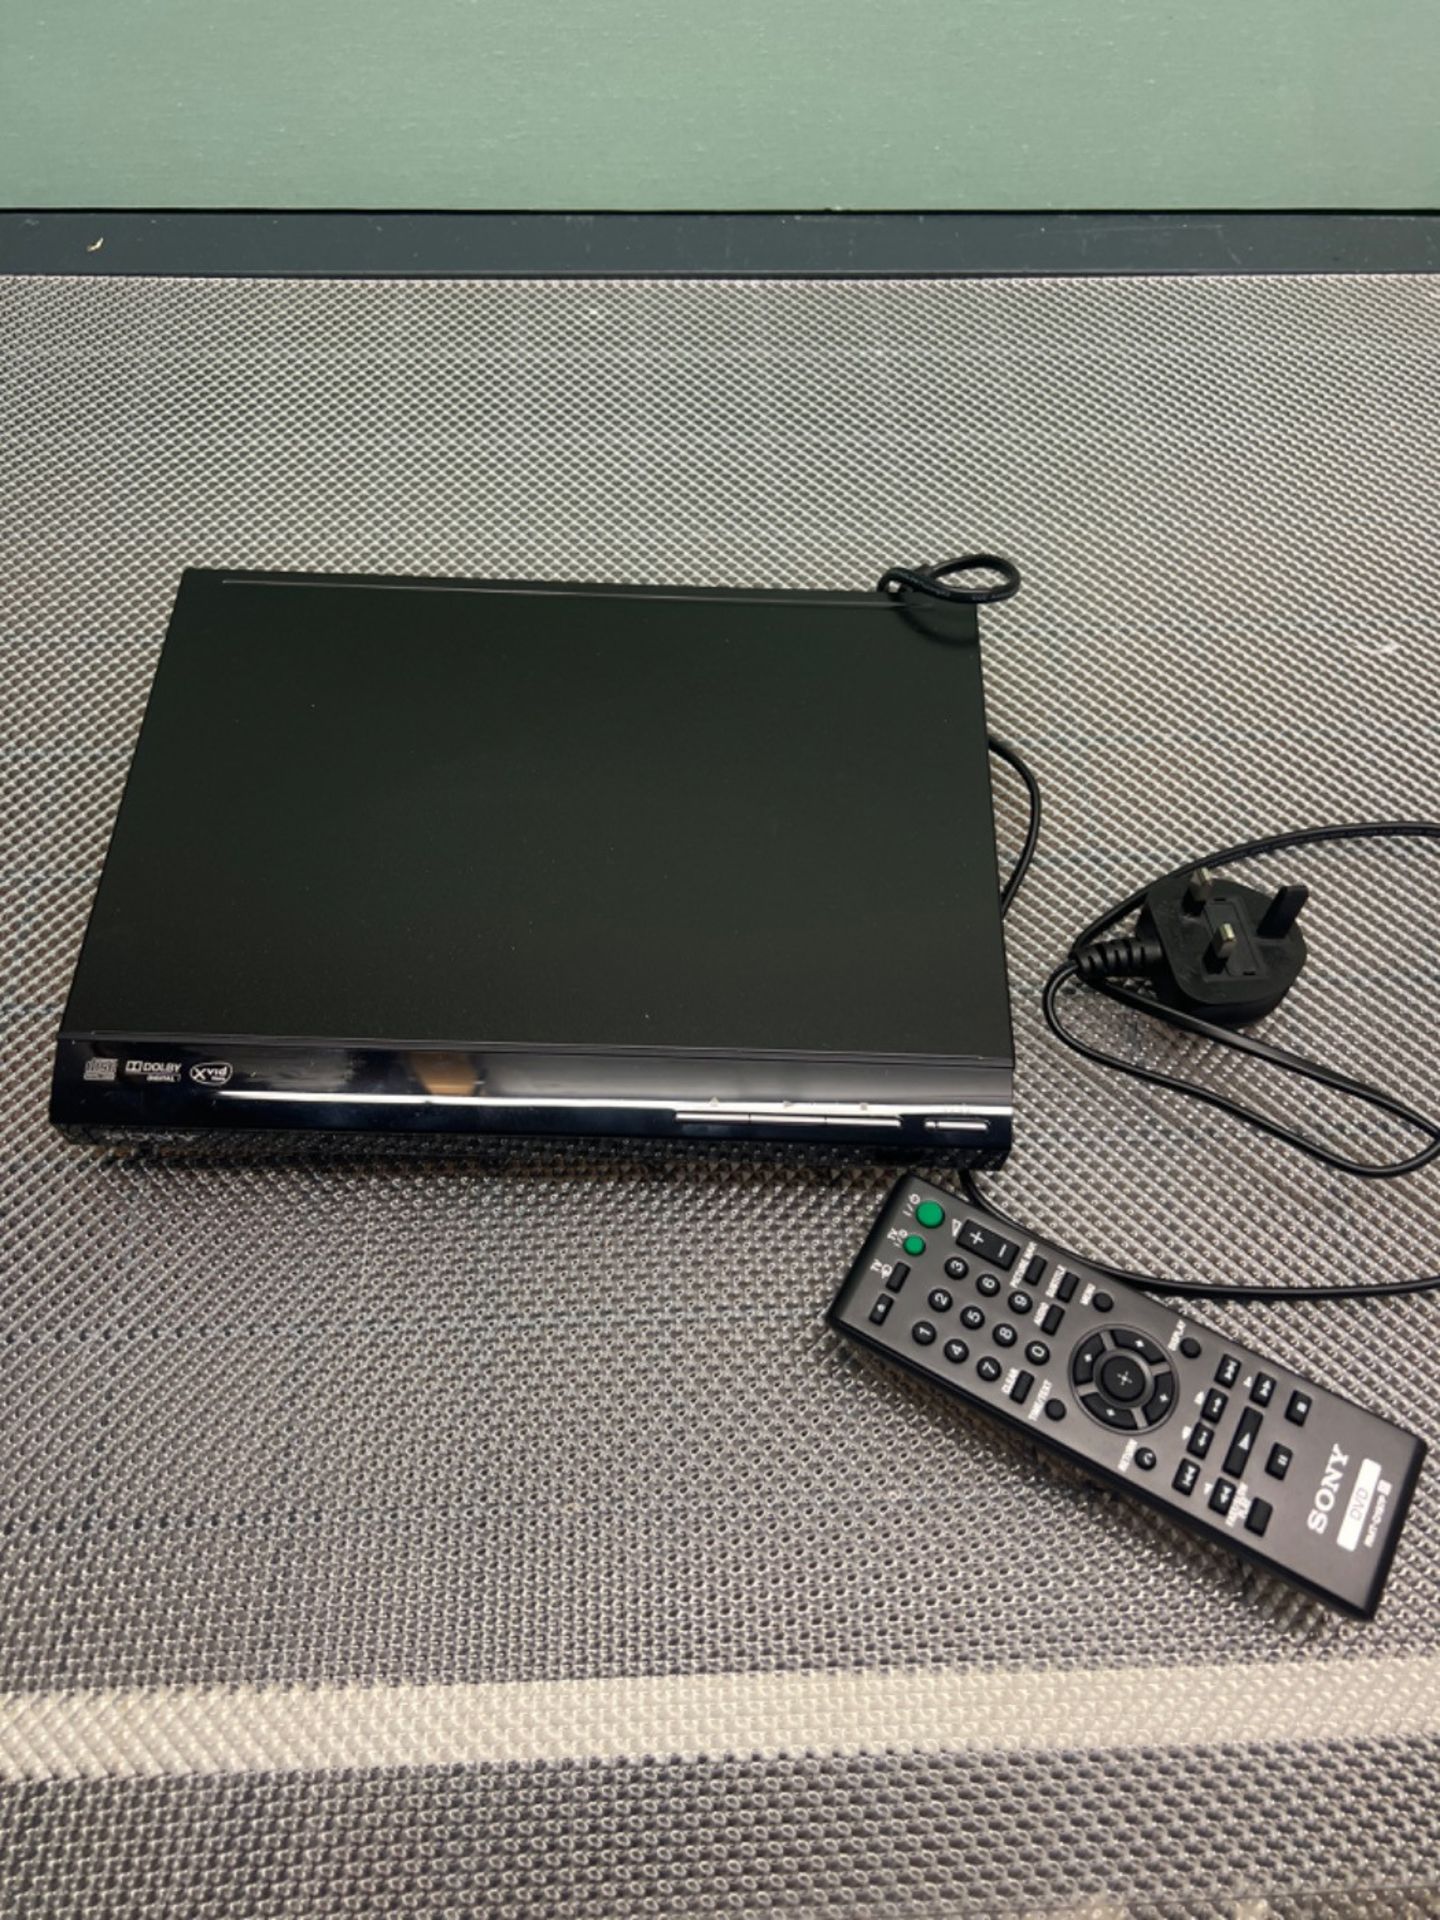 Sony DVPSR760H DVD Upgrade Player (HDMI, 1080 Pixel Upscaling, USB Connectivity), Black - Image 2 of 3